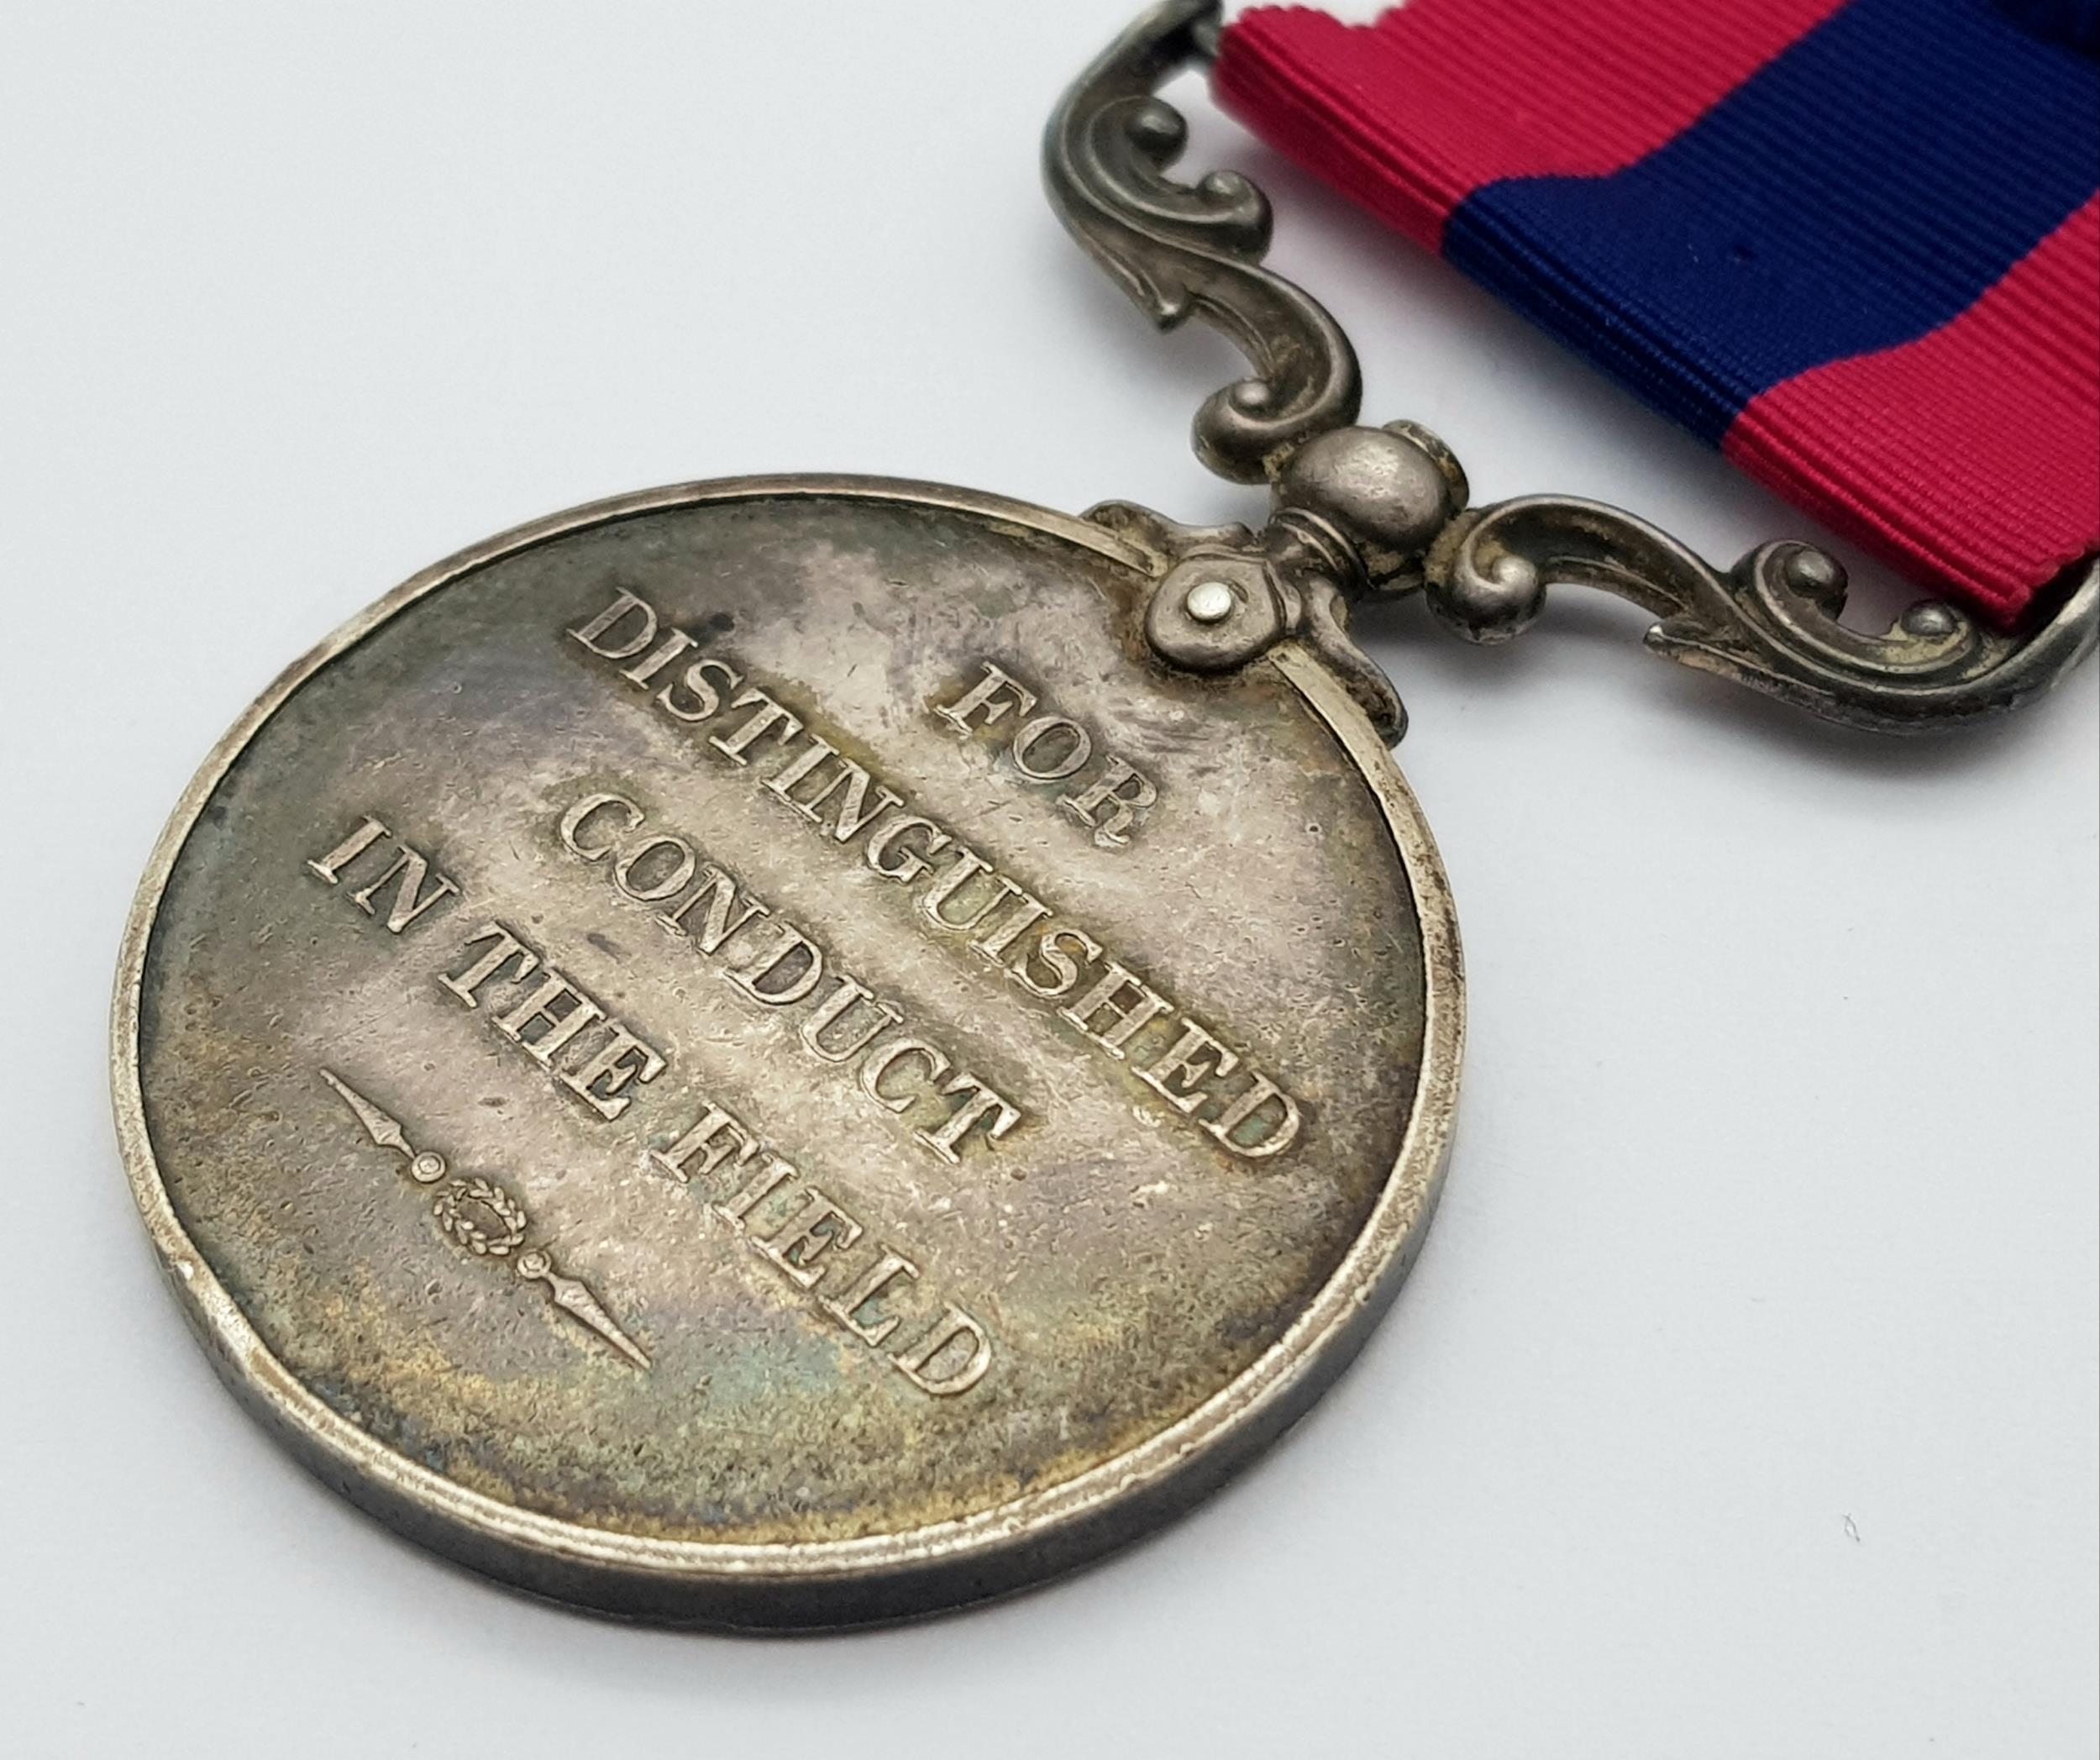 WW1 Distinguished Conduct Medal (D.C.M) Original Un-named Medal for Foreign Recipients. - Image 4 of 4